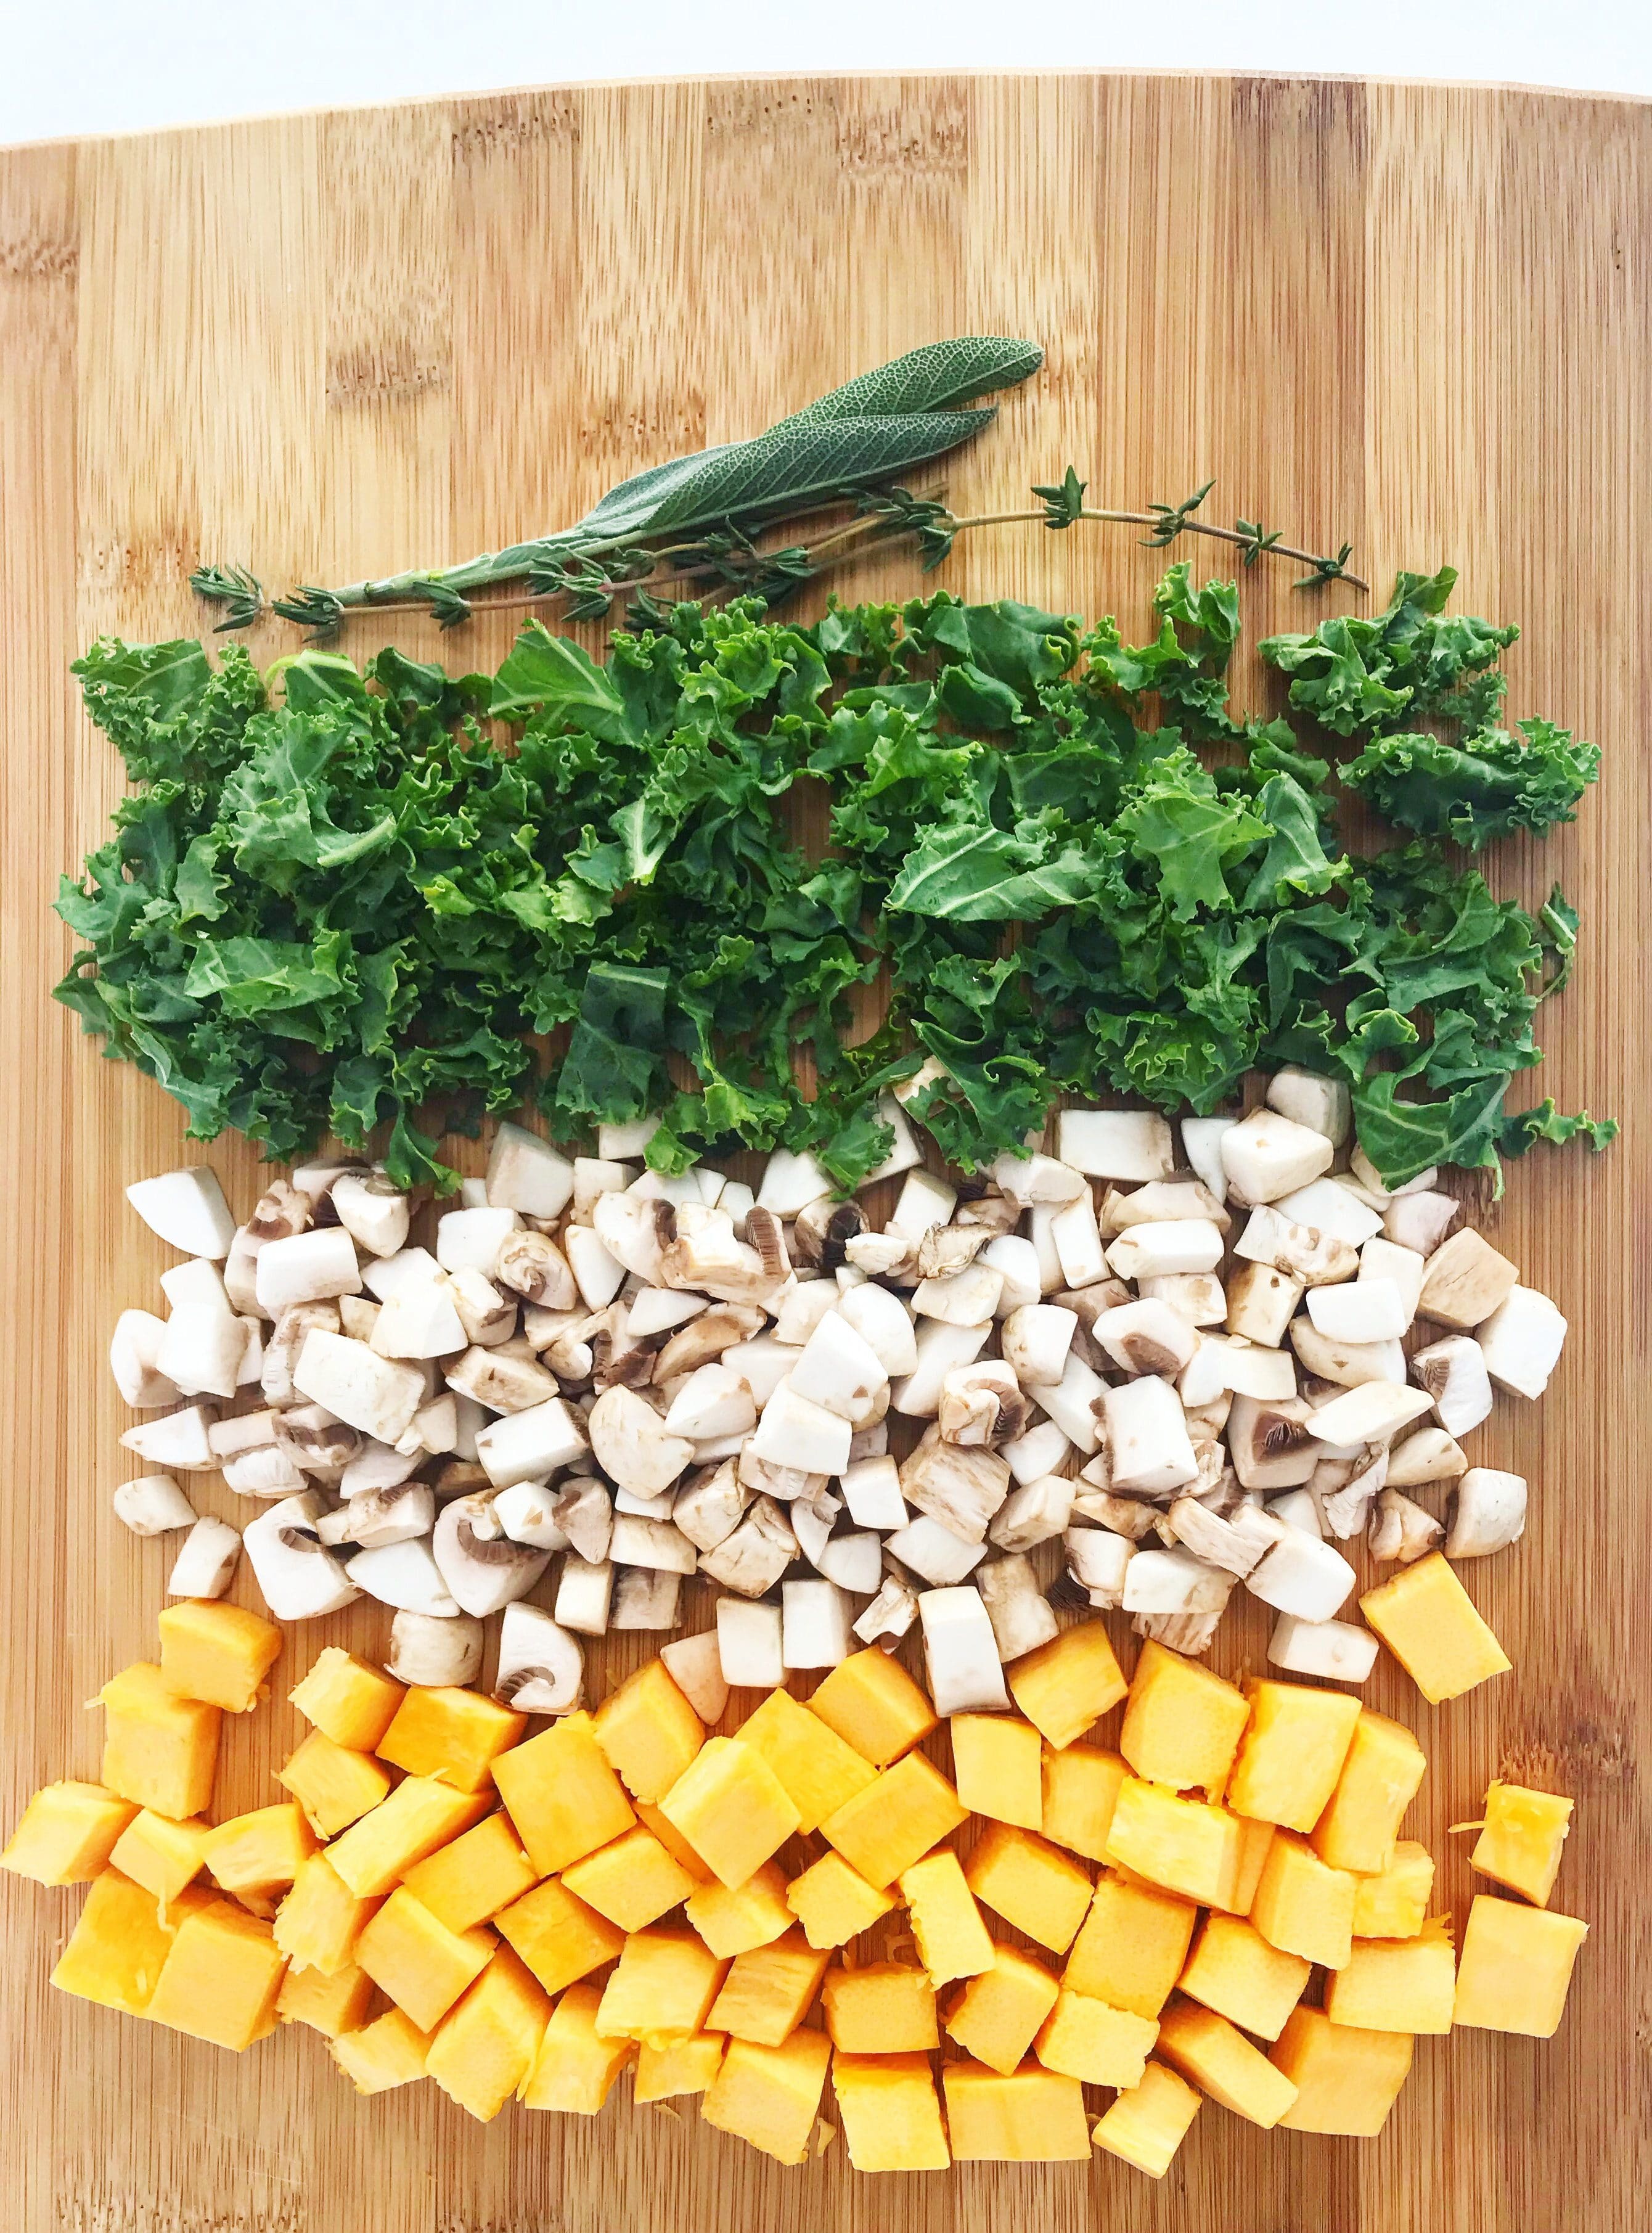 Wooden cutting board with cut up pumpkin, mushrooms, kale, and fresh herbs.